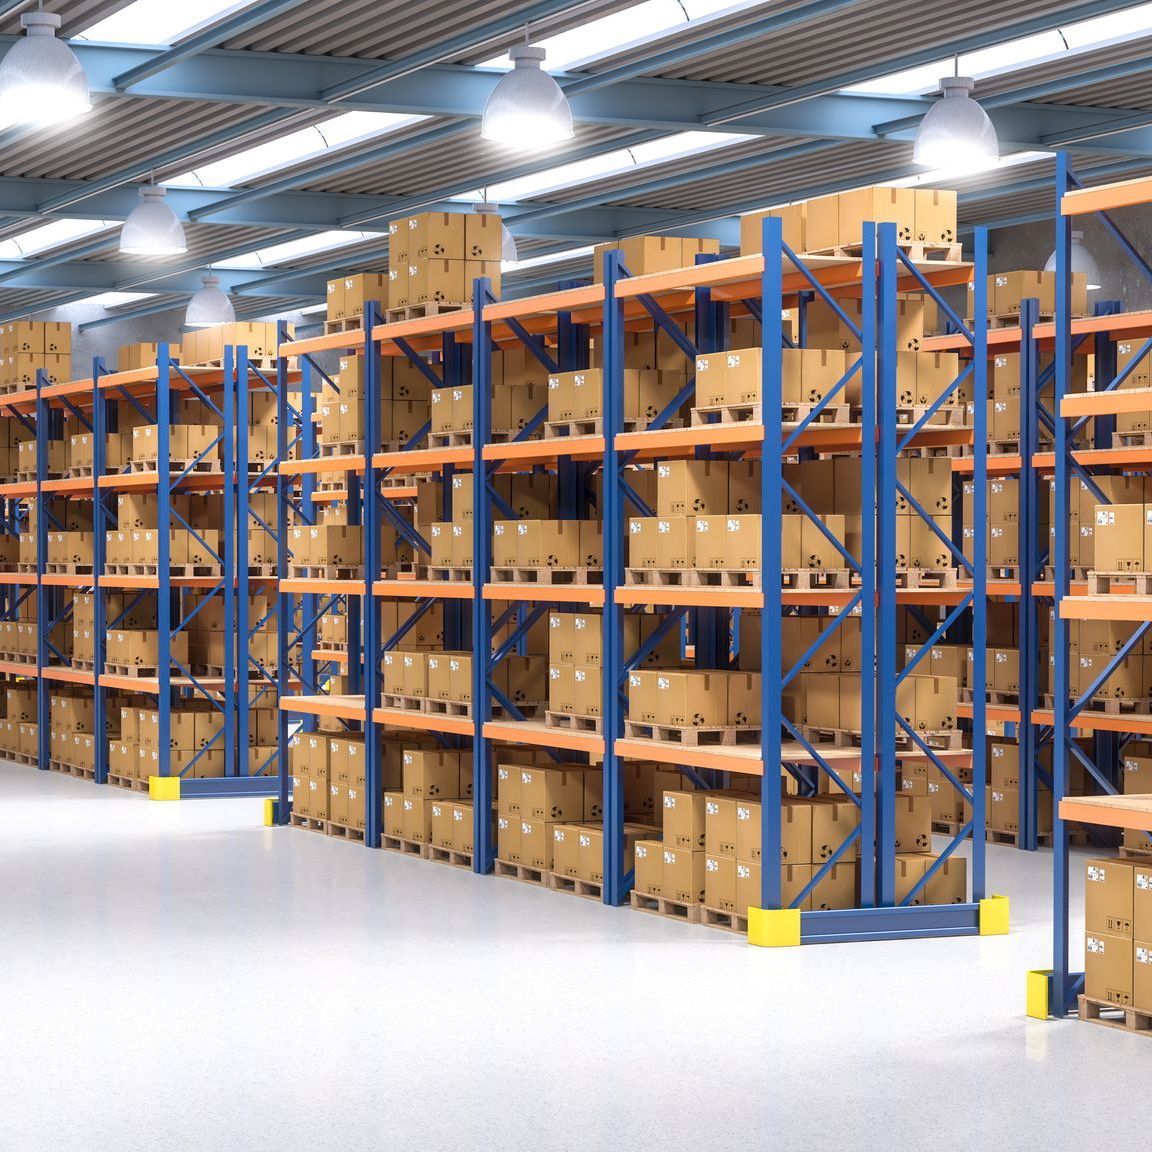 a large warehouse filled with lots of cardboard boxes and pallets